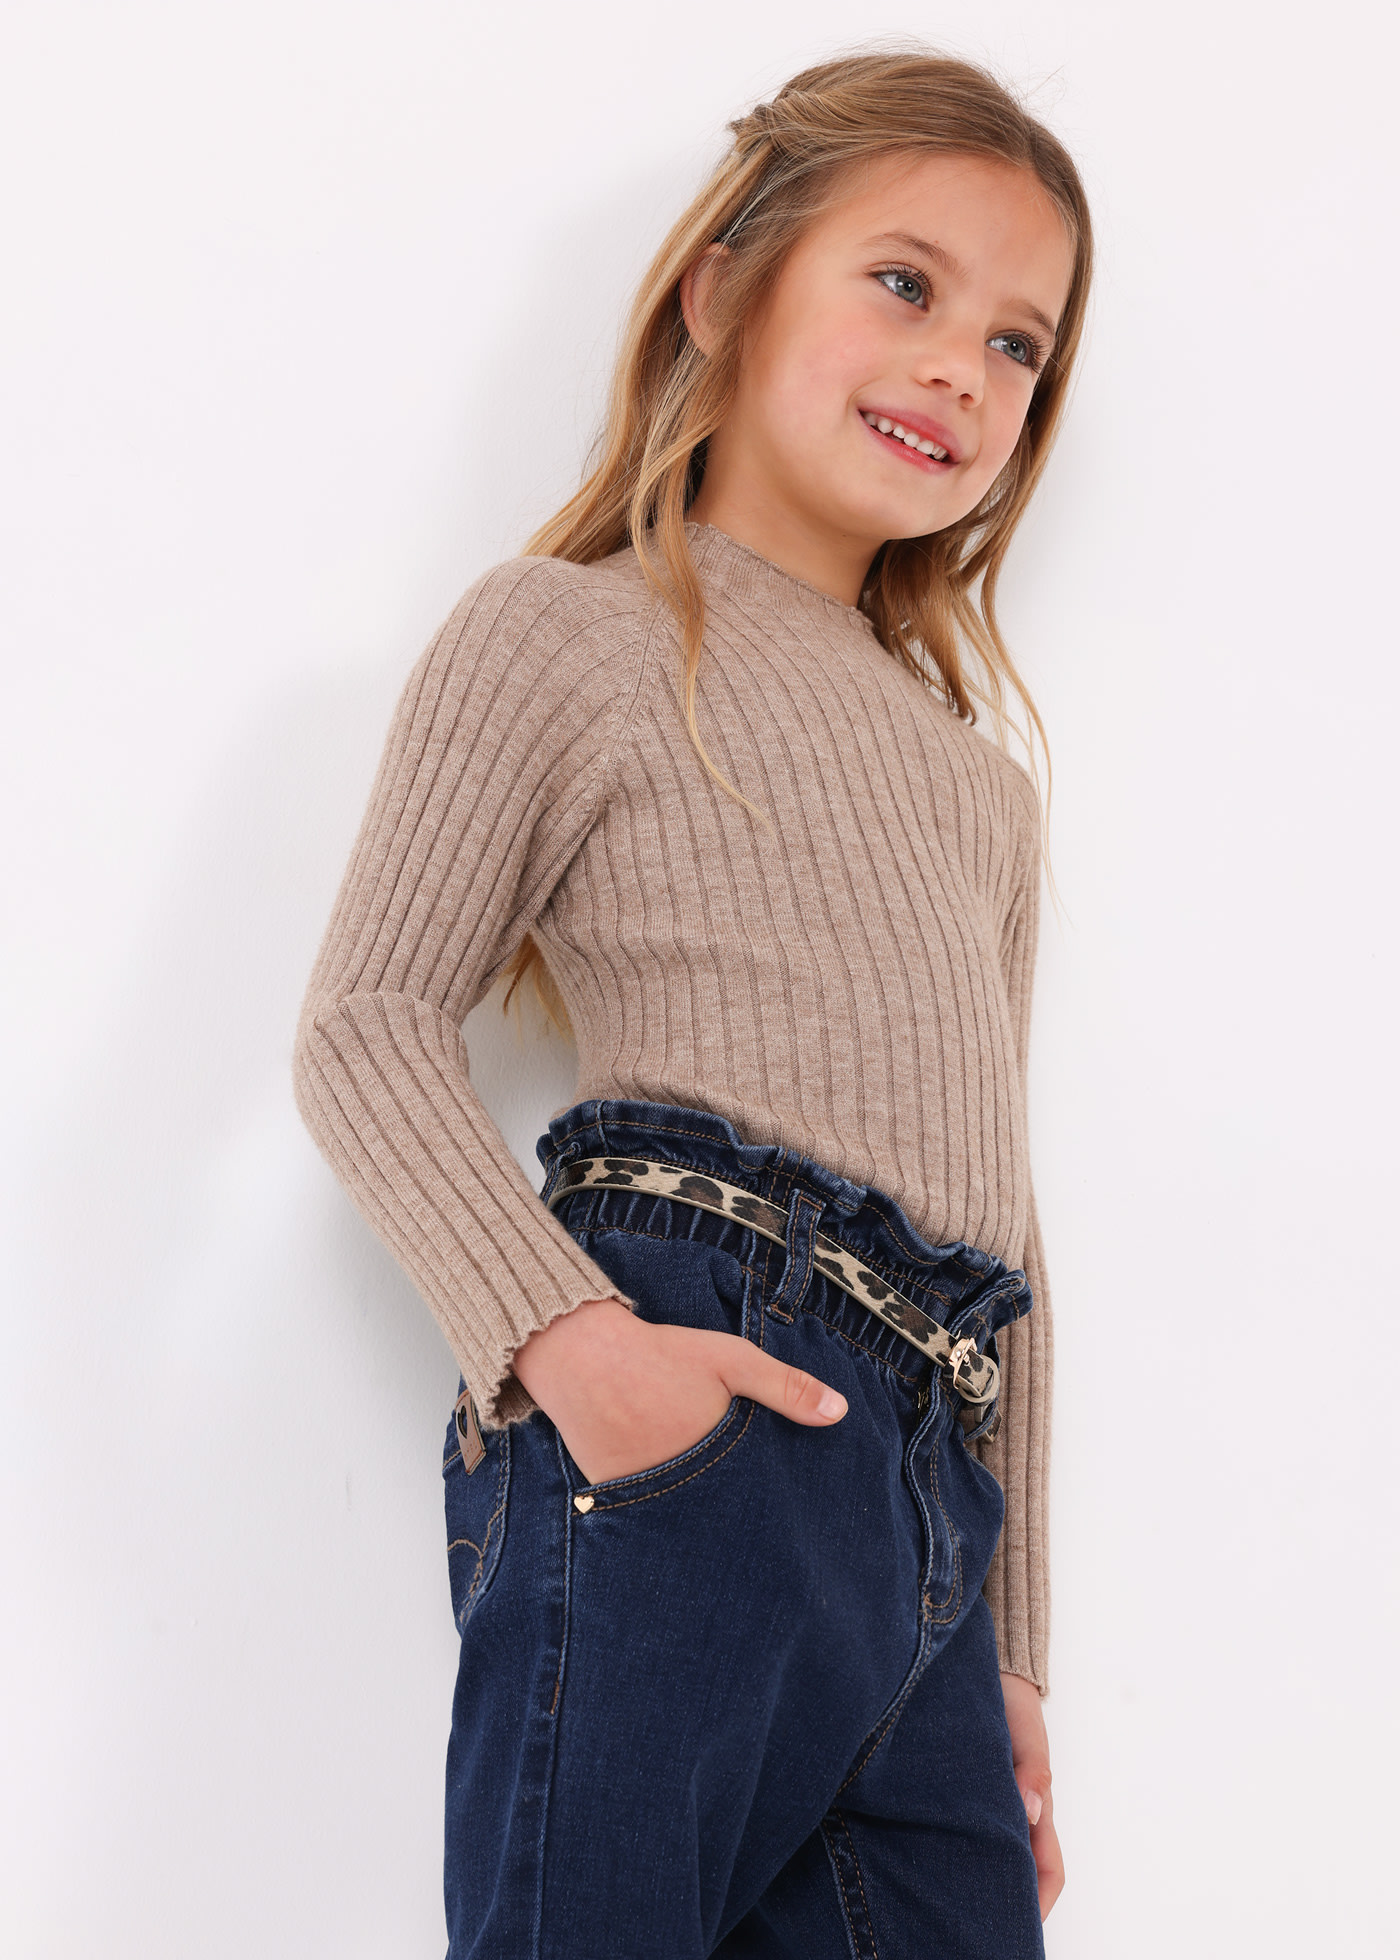 SITENG Girls Kids Boot Cut Pearl Embellished Jeans India | Ubuy